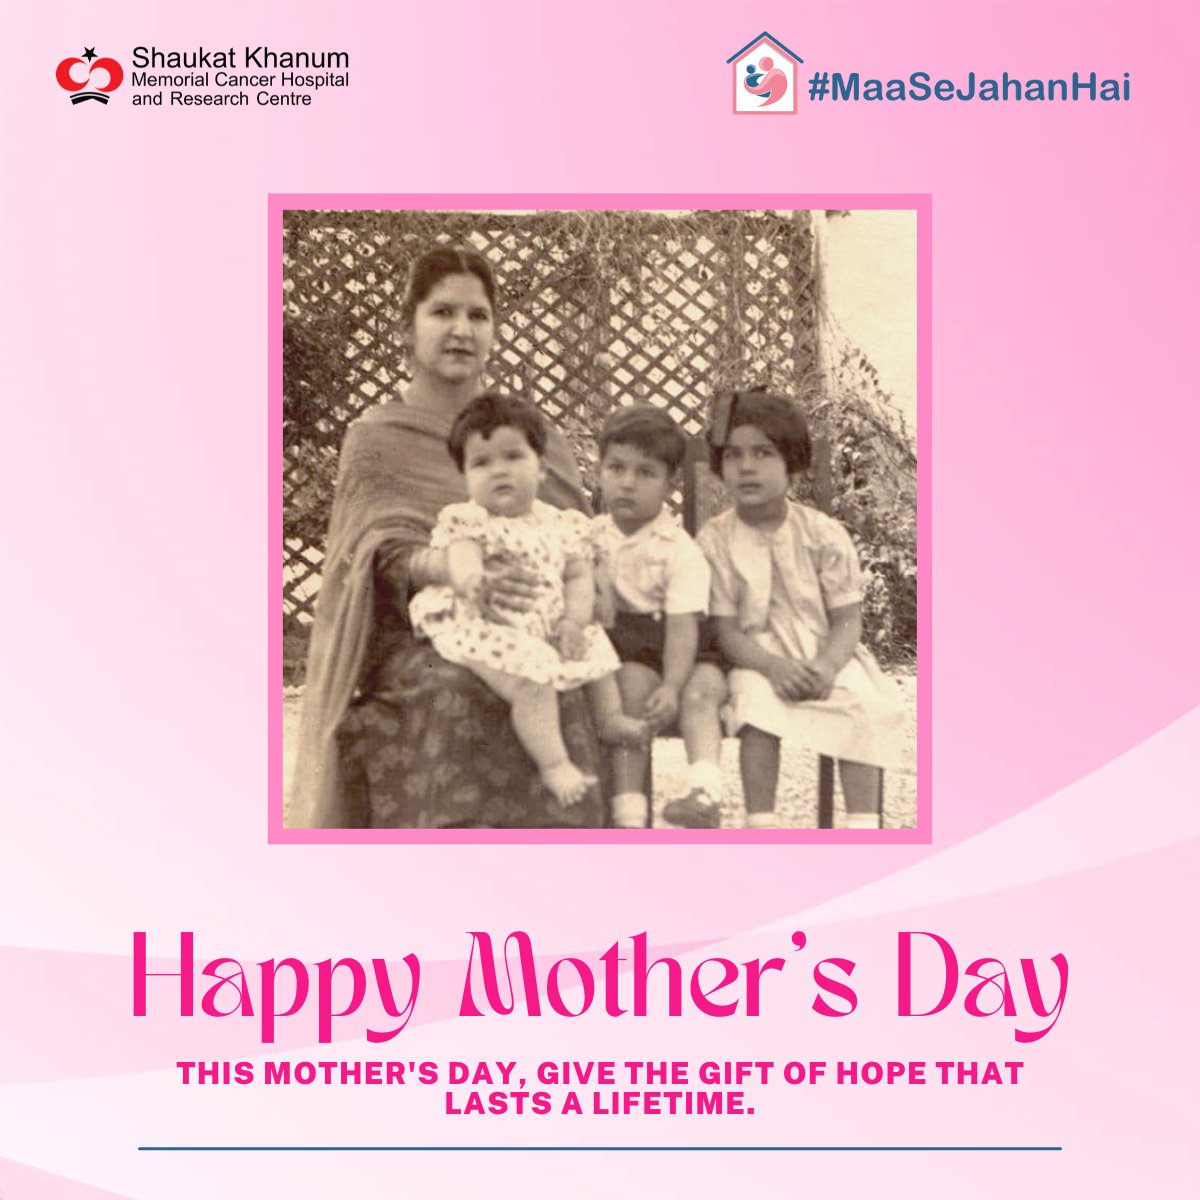 29 years ago, a son honoured his mother by founding Shaukat Khanum Memorial Cancer Hospital and Research Centre.

On this Mother's Day, give the gift of hope that will last a lifetime.

To donate, visit: shaukatkhanum.org.pk/donors/#donati…

#MaaSeJahaanHai #MothersDay #MothersDay2024 #SKMCH